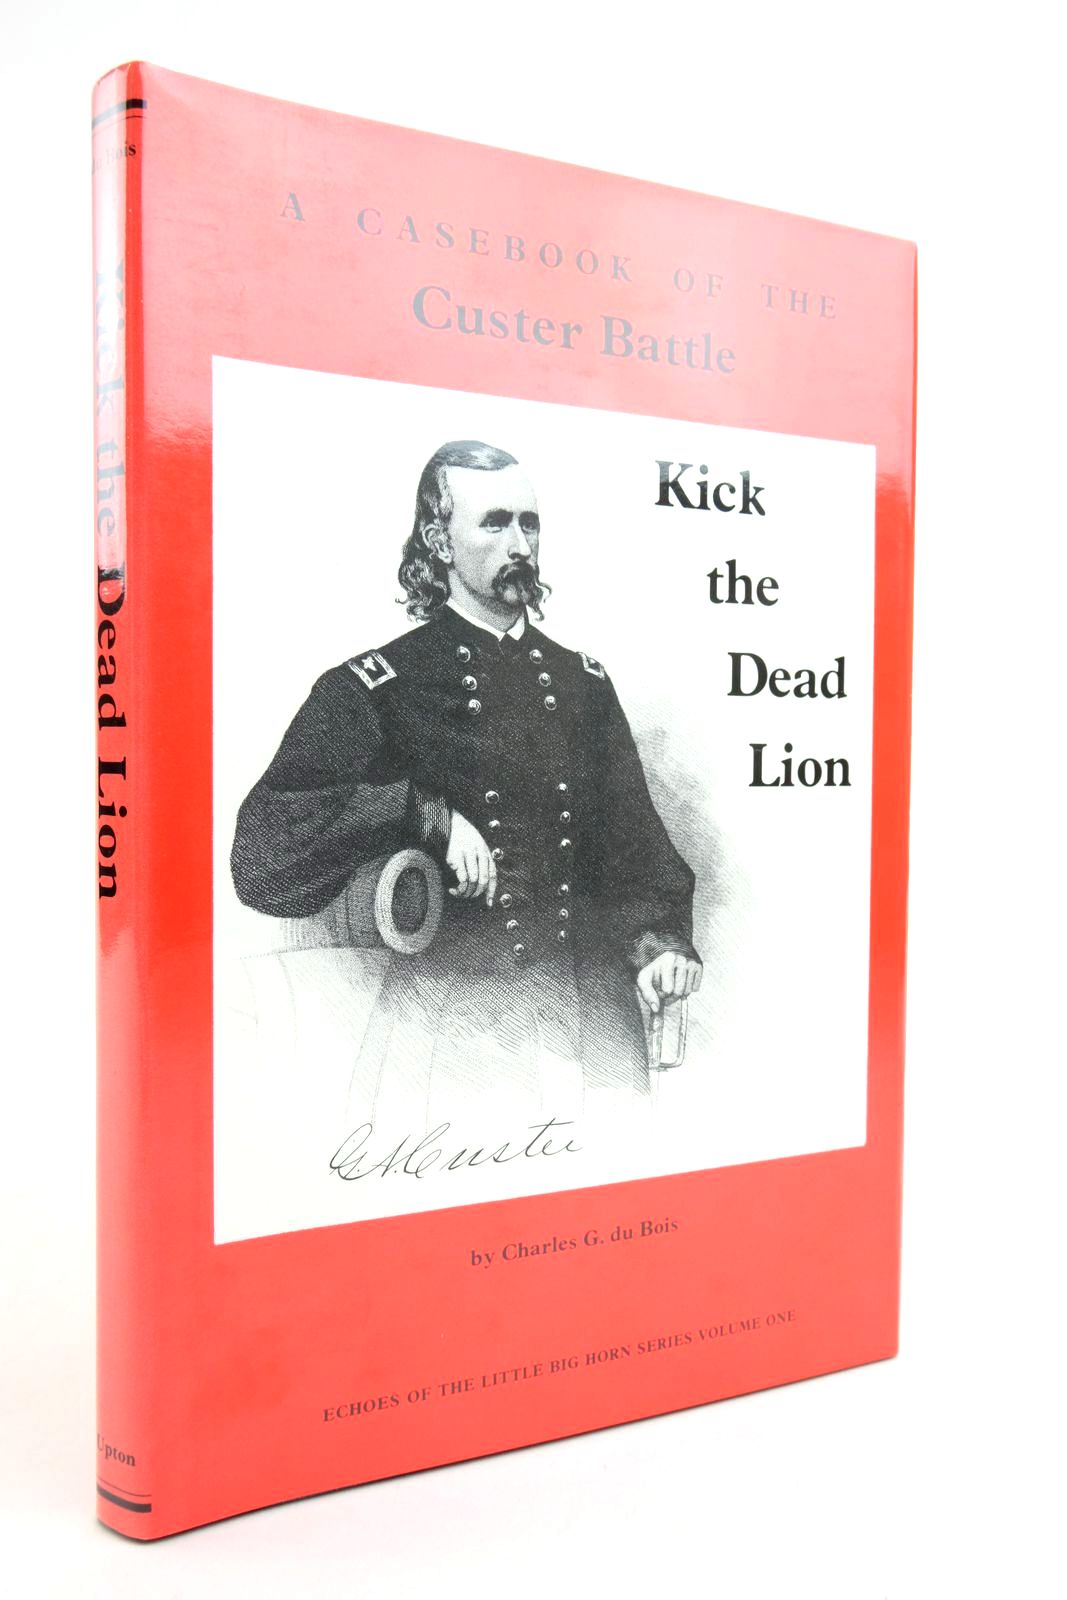 Photo of KICK THE DEAD LION: A CASEBOOK OF THE CUSTER BATTLE written by Du Bois, Charles G. published by Upton & Sons (STOCK CODE: 2136595)  for sale by Stella & Rose's Books